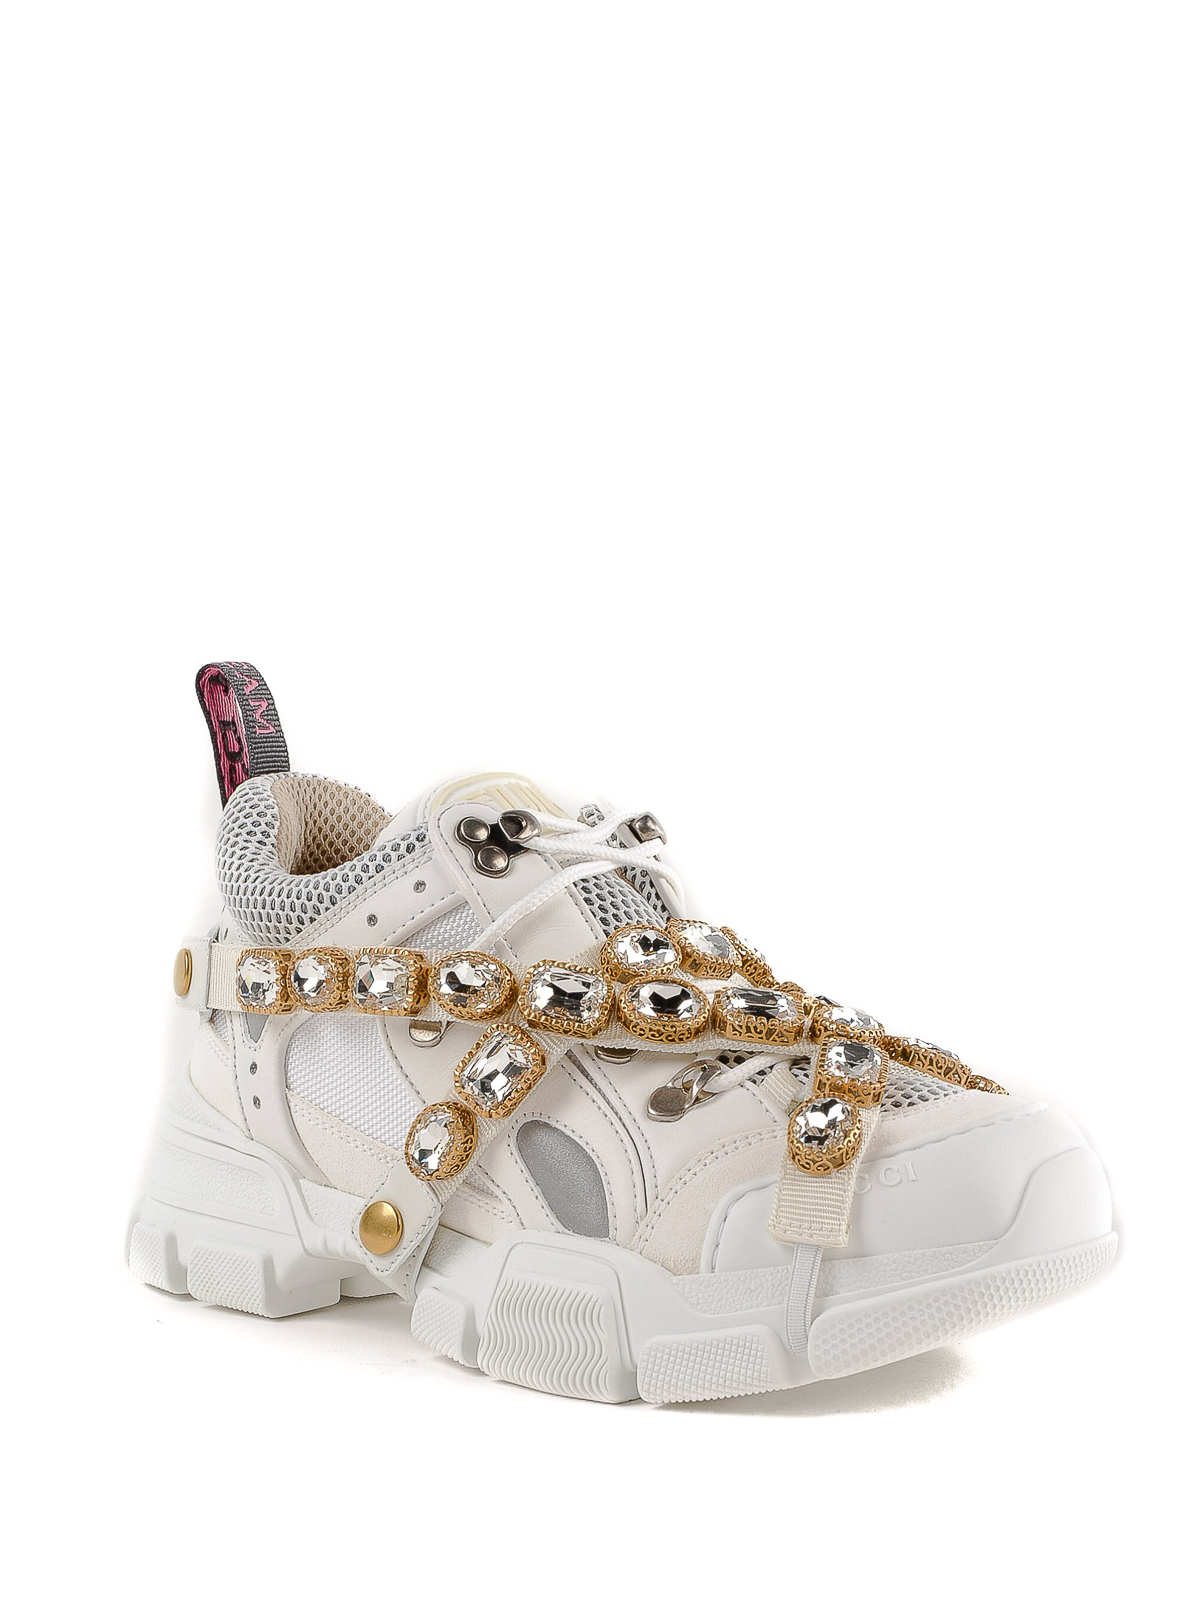 Gucci - Flashtrek sneakers with 